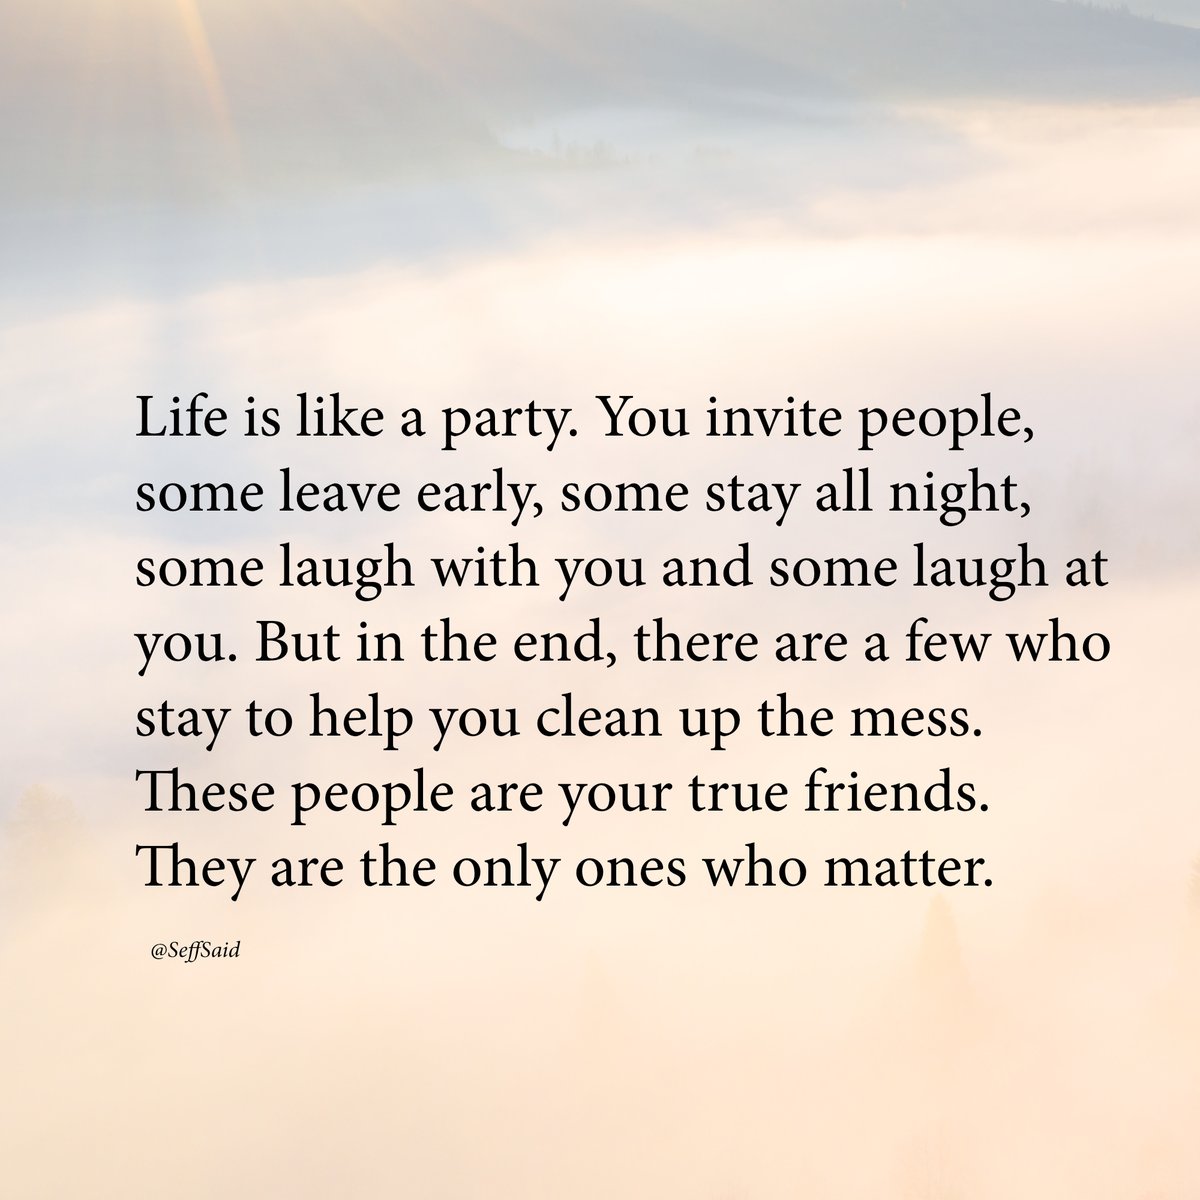 Life is like a party